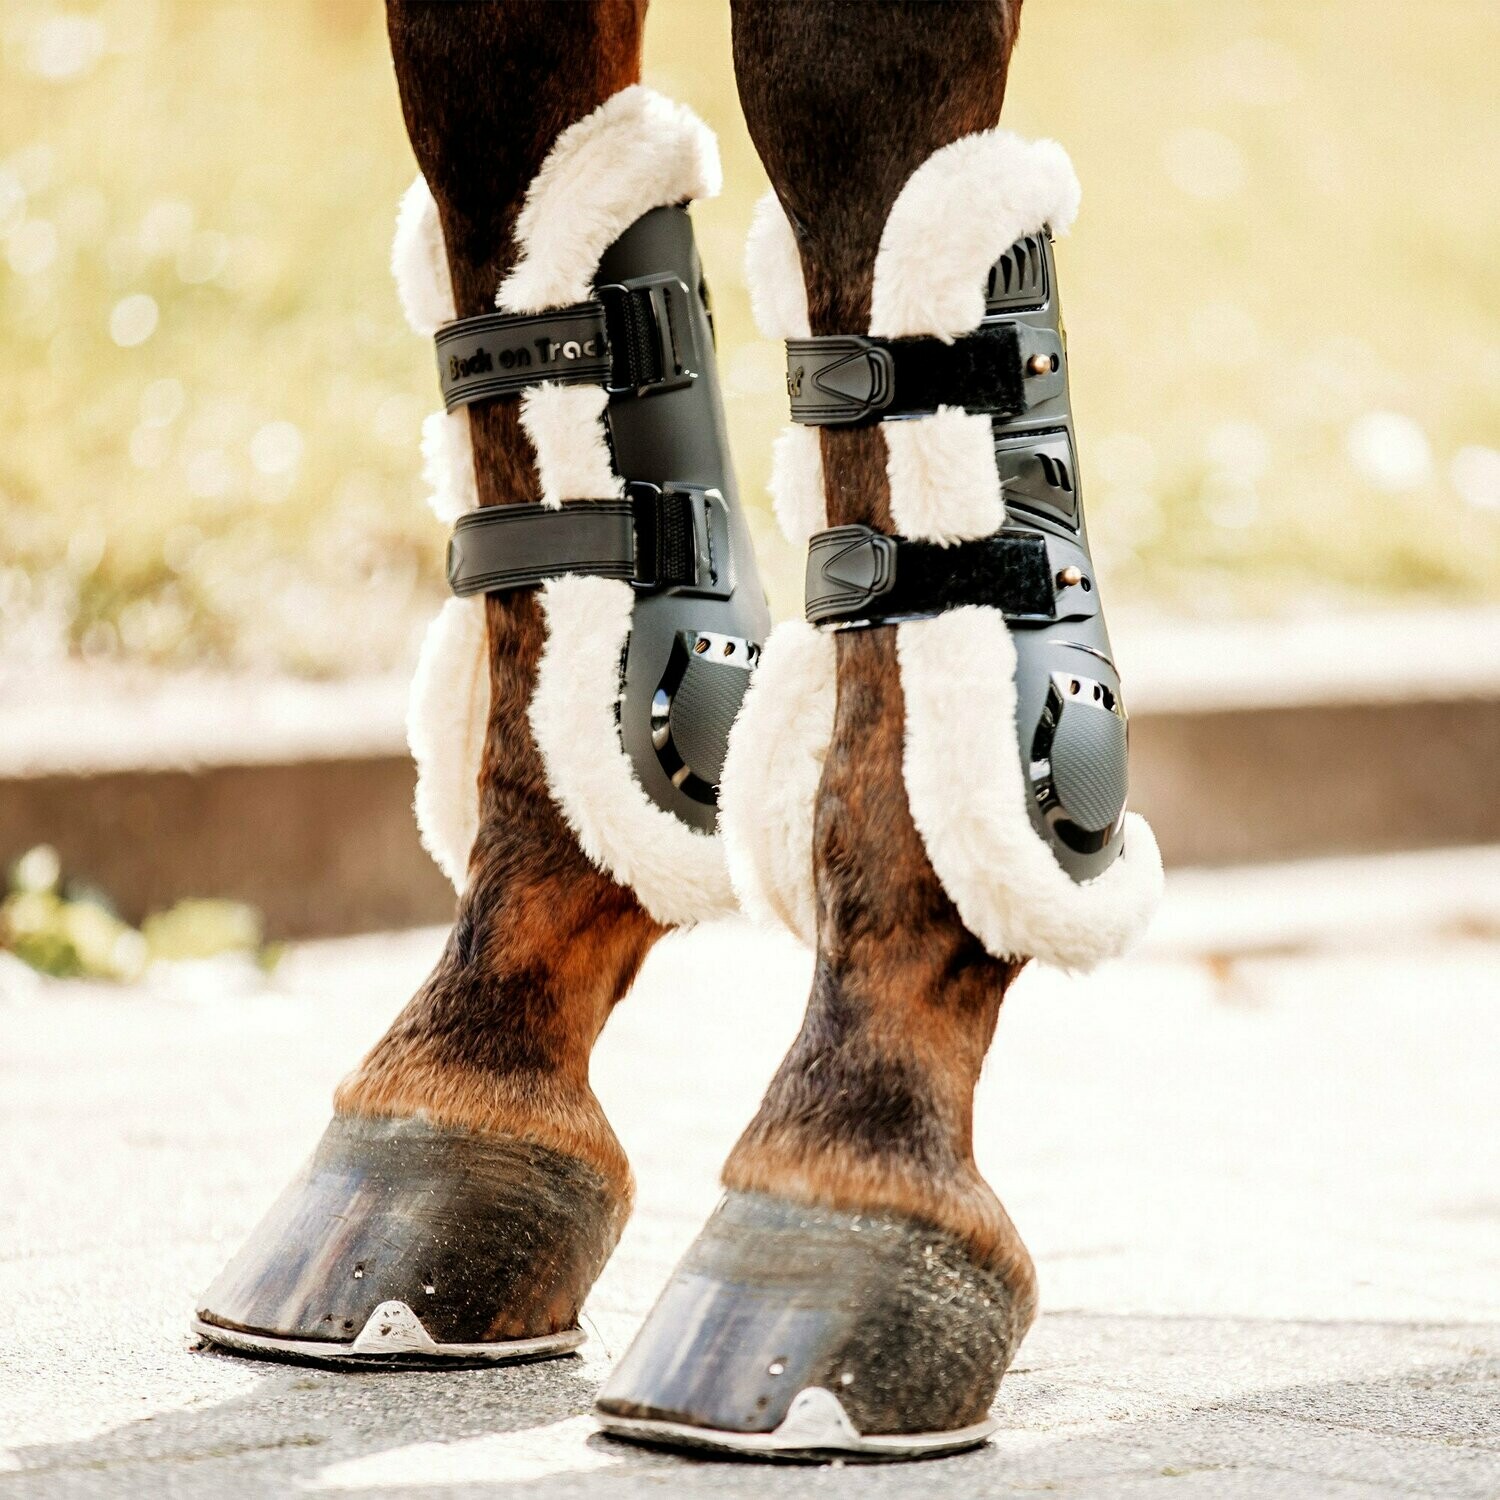 Air Flow Tendon Boots mit Fell